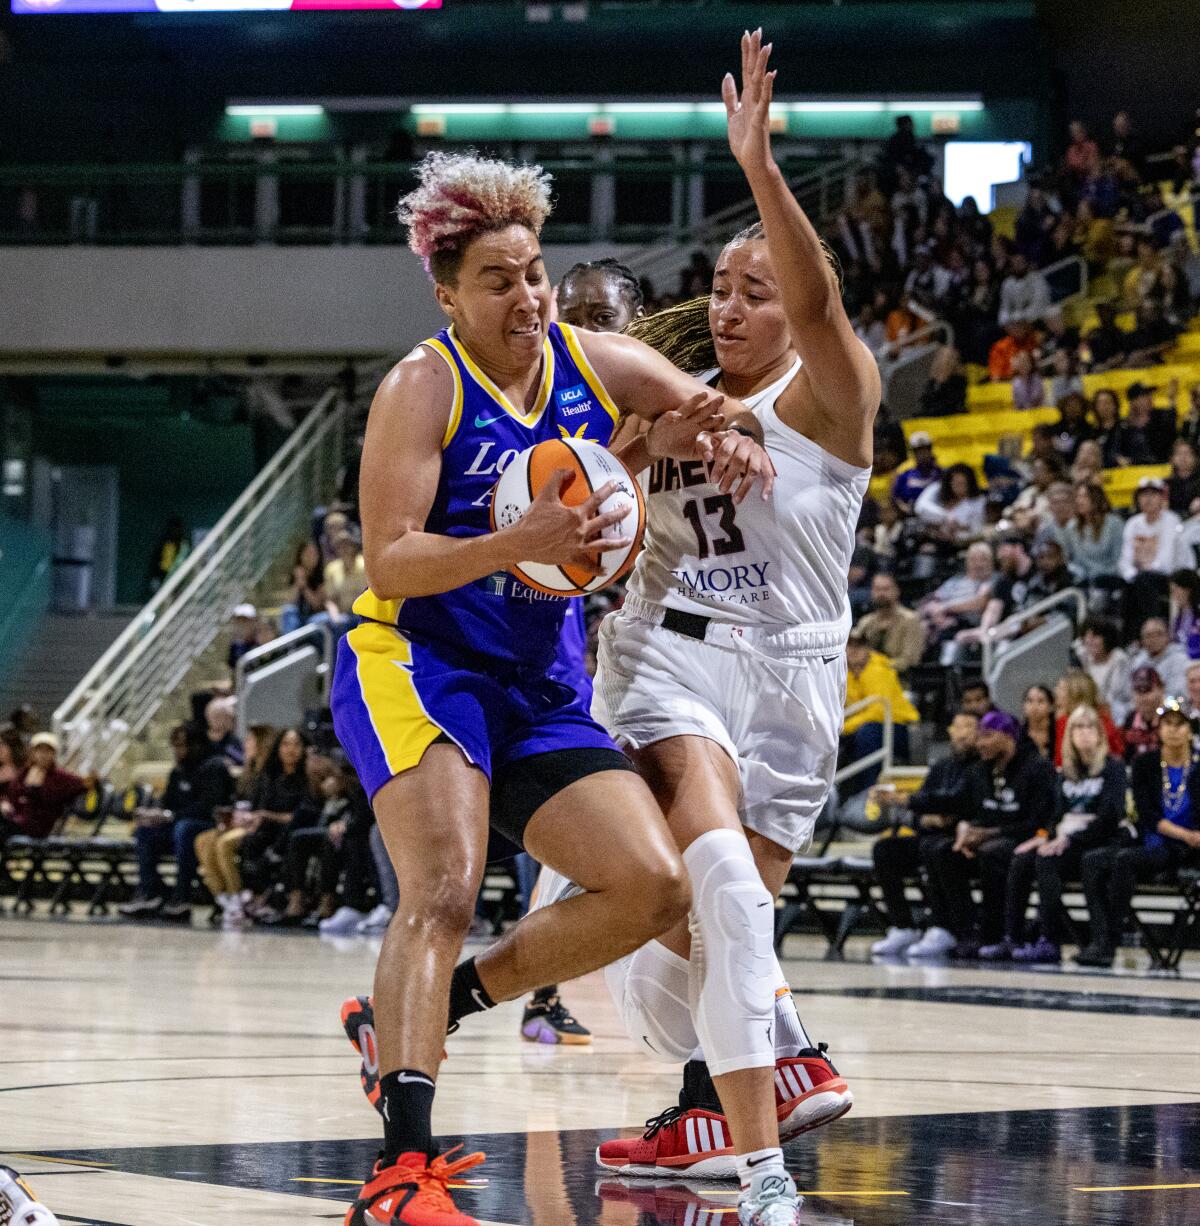 Sparks guard Layshia Clarendon drives to the basket under pressure from Atlanta Dream guard Haley Jones 